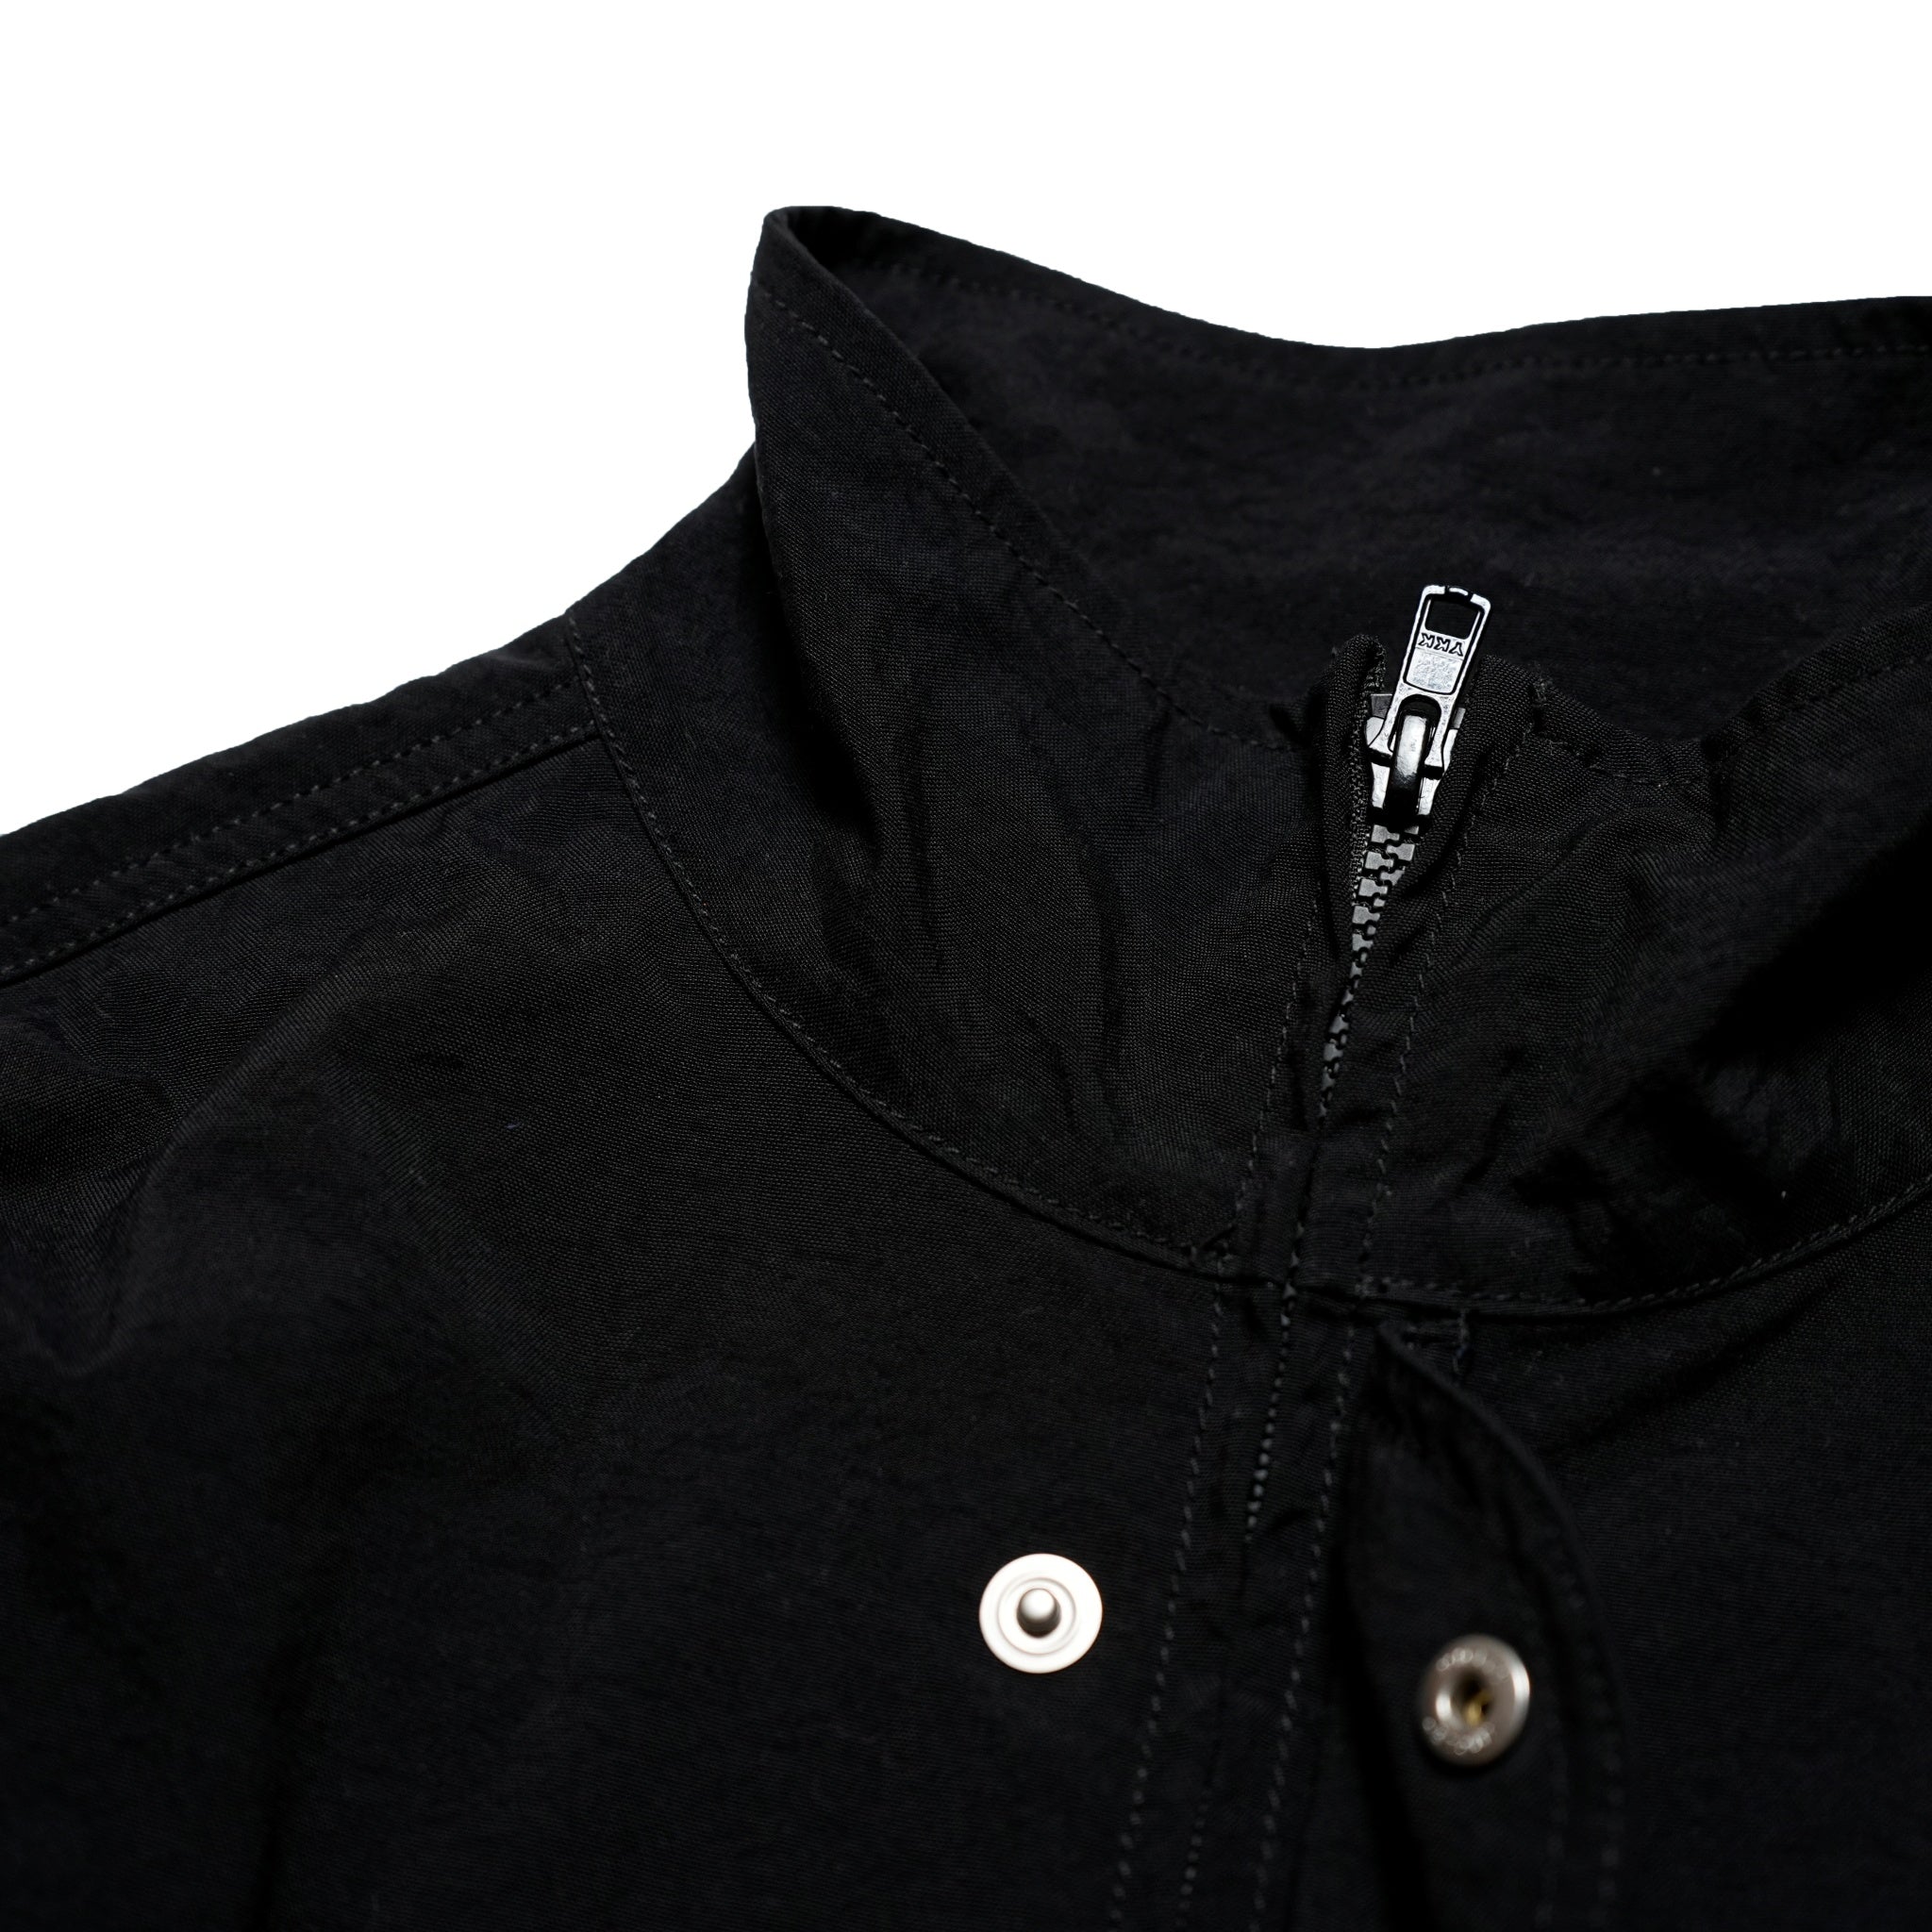 No:24＃01-1030-0_BLACK | Name:CHEAP STAND FIELD JACKET | Color:Black【MINAMI ANDERSON_ミナミアンダーソン】【入荷予定アイテム・入荷連絡可能】